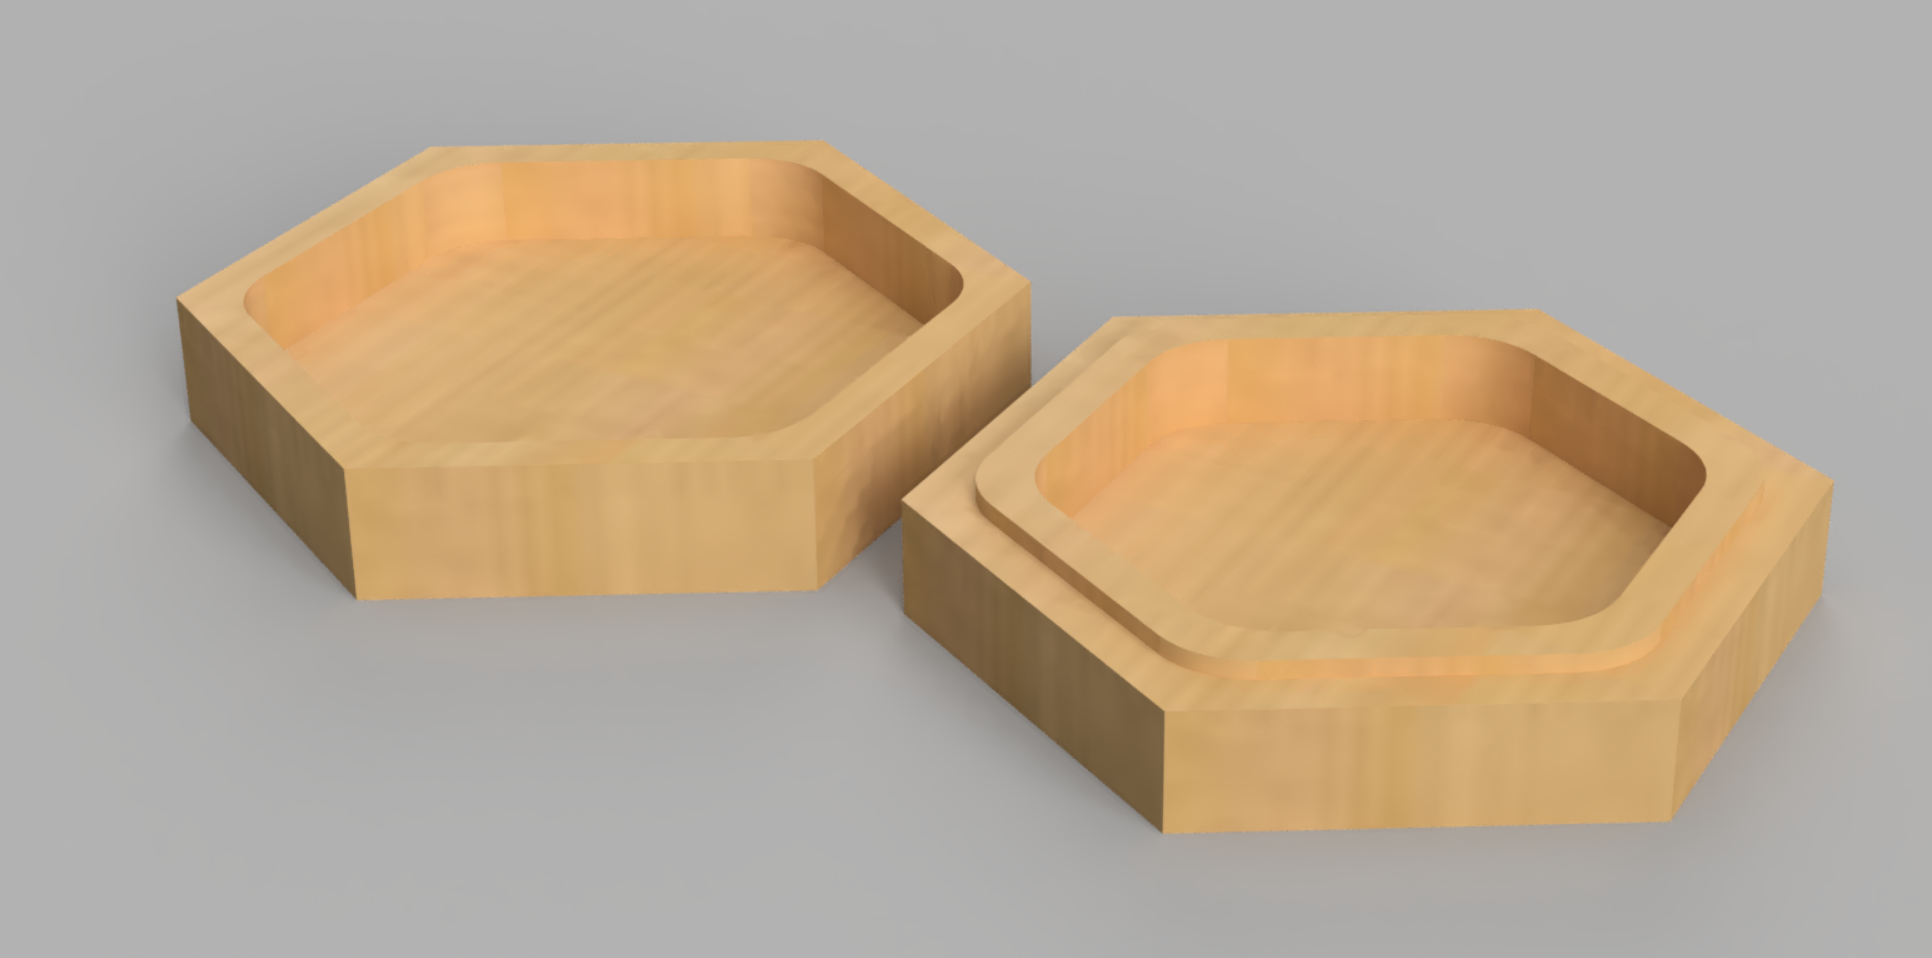 Fusion 360 rendering of the hexbox top and bottom